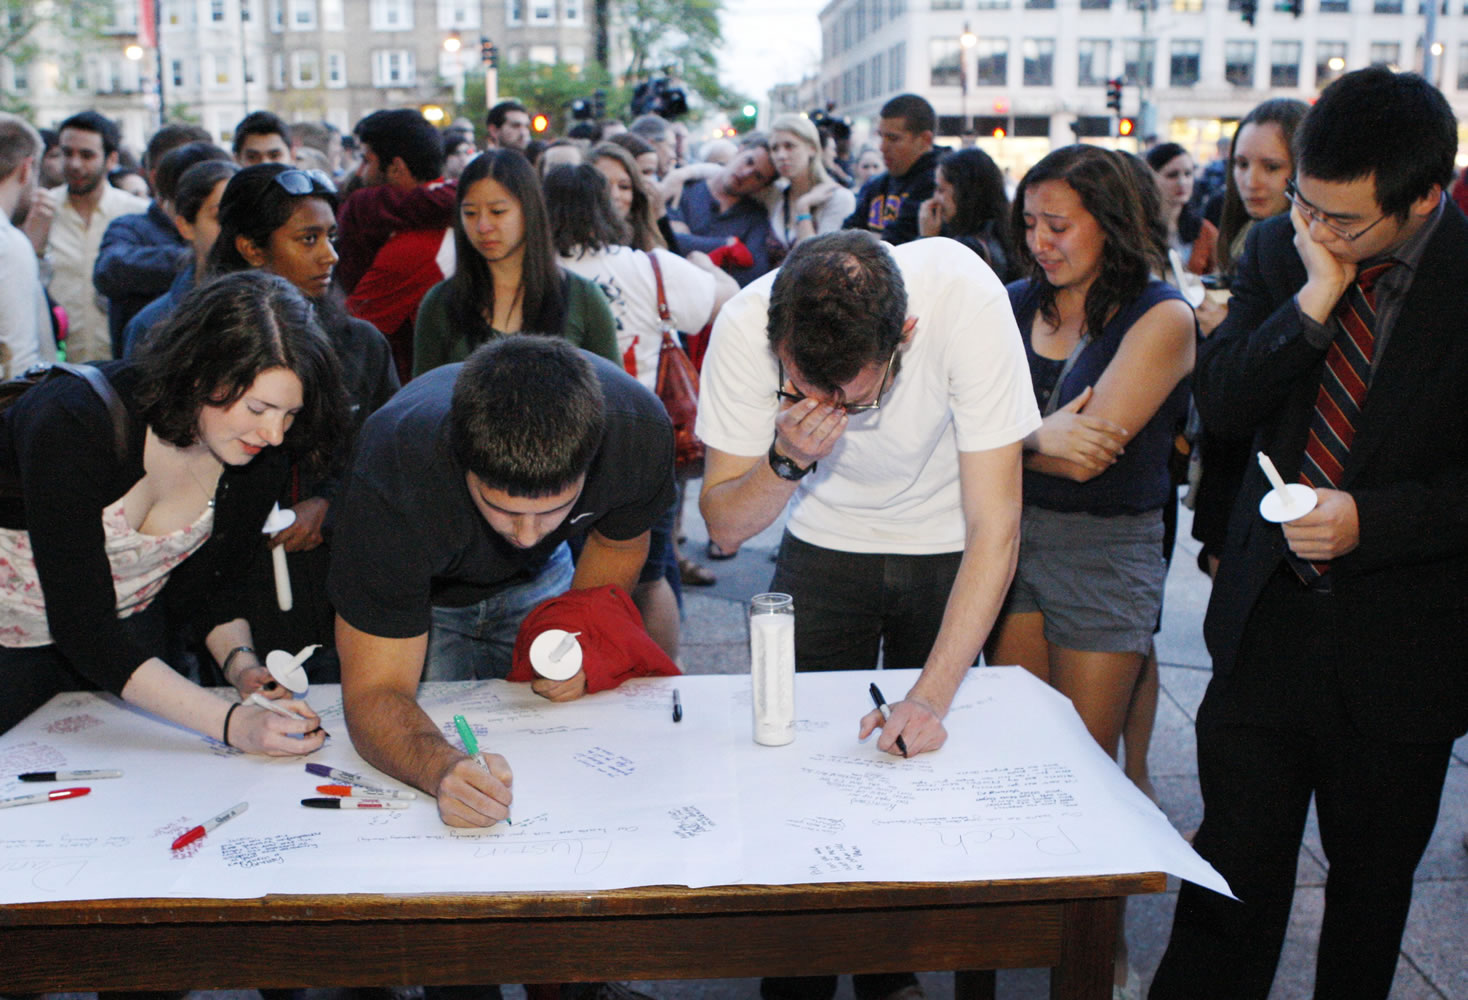 Boston University students gather to sign a condolence note prior to a candlelight vigil on Marsh Plaza at Boston University, Saturday, May 12, 2012, in Boston, for three students studying in New Zealand who were killed when their minivan crashed during a weekend trip.  At least five other students were injured in the accident, including one who was in critical condition. Boston University spokesman Colin Riley said those killed in the accident were Daniela Lekhno, 20, of Manalapan, N.J.; Austin Brashears, 21, of Huntington Beach, Calif.; and Roch Jauberty, 21, whose parents live in Paris.